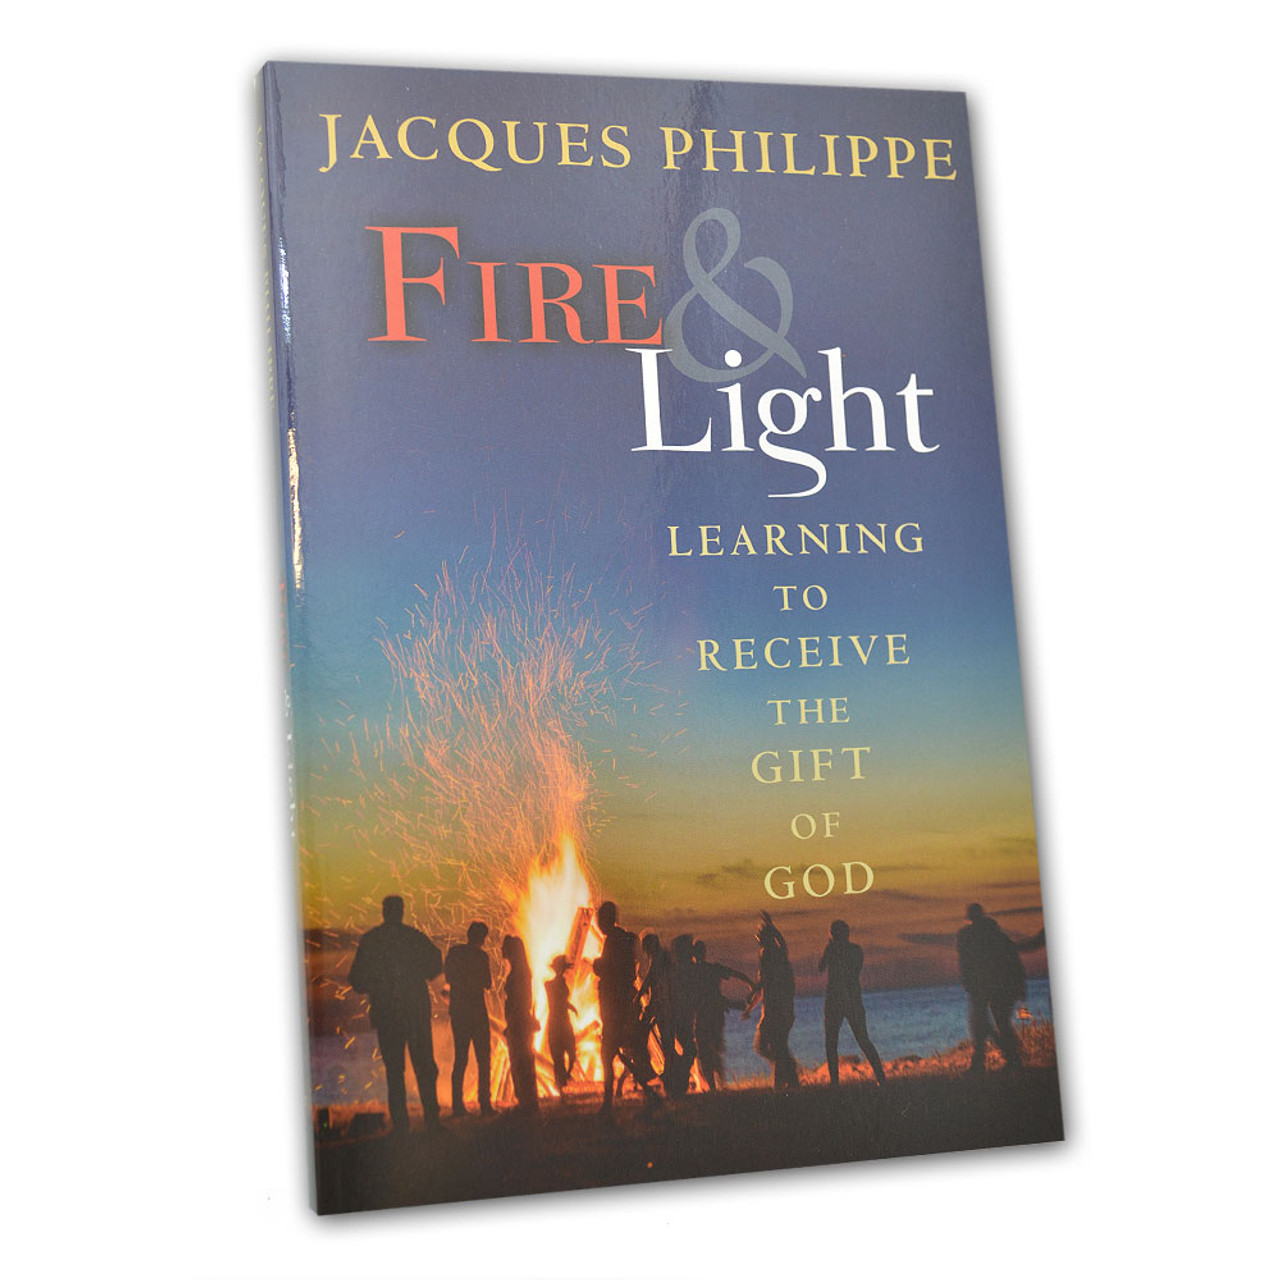 Fire and Light by Fr. Jacques Philippe